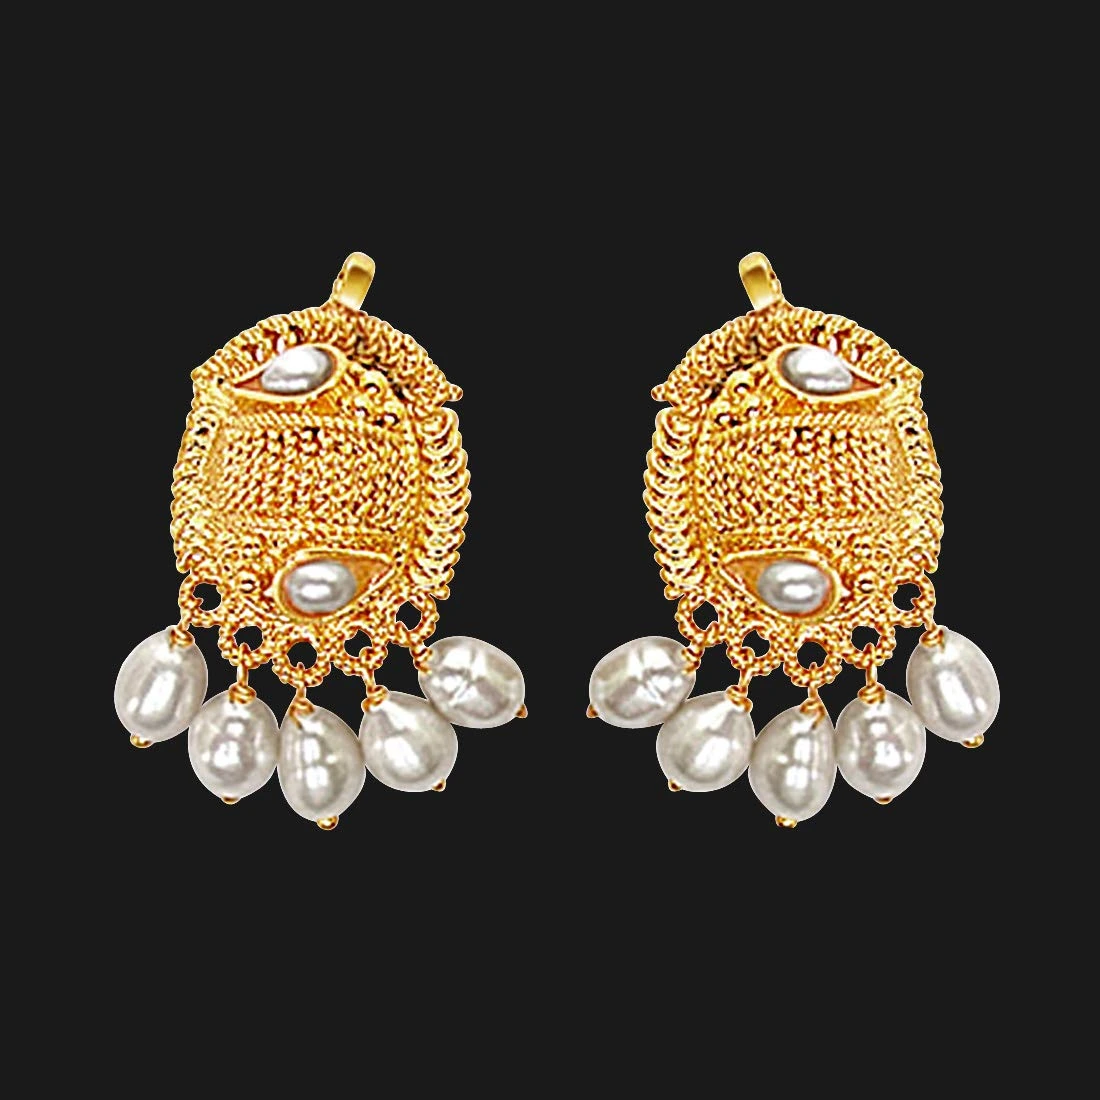 Oval Shaped Freshwater Pearl & Gold Plated Earrings for Women (SE138)